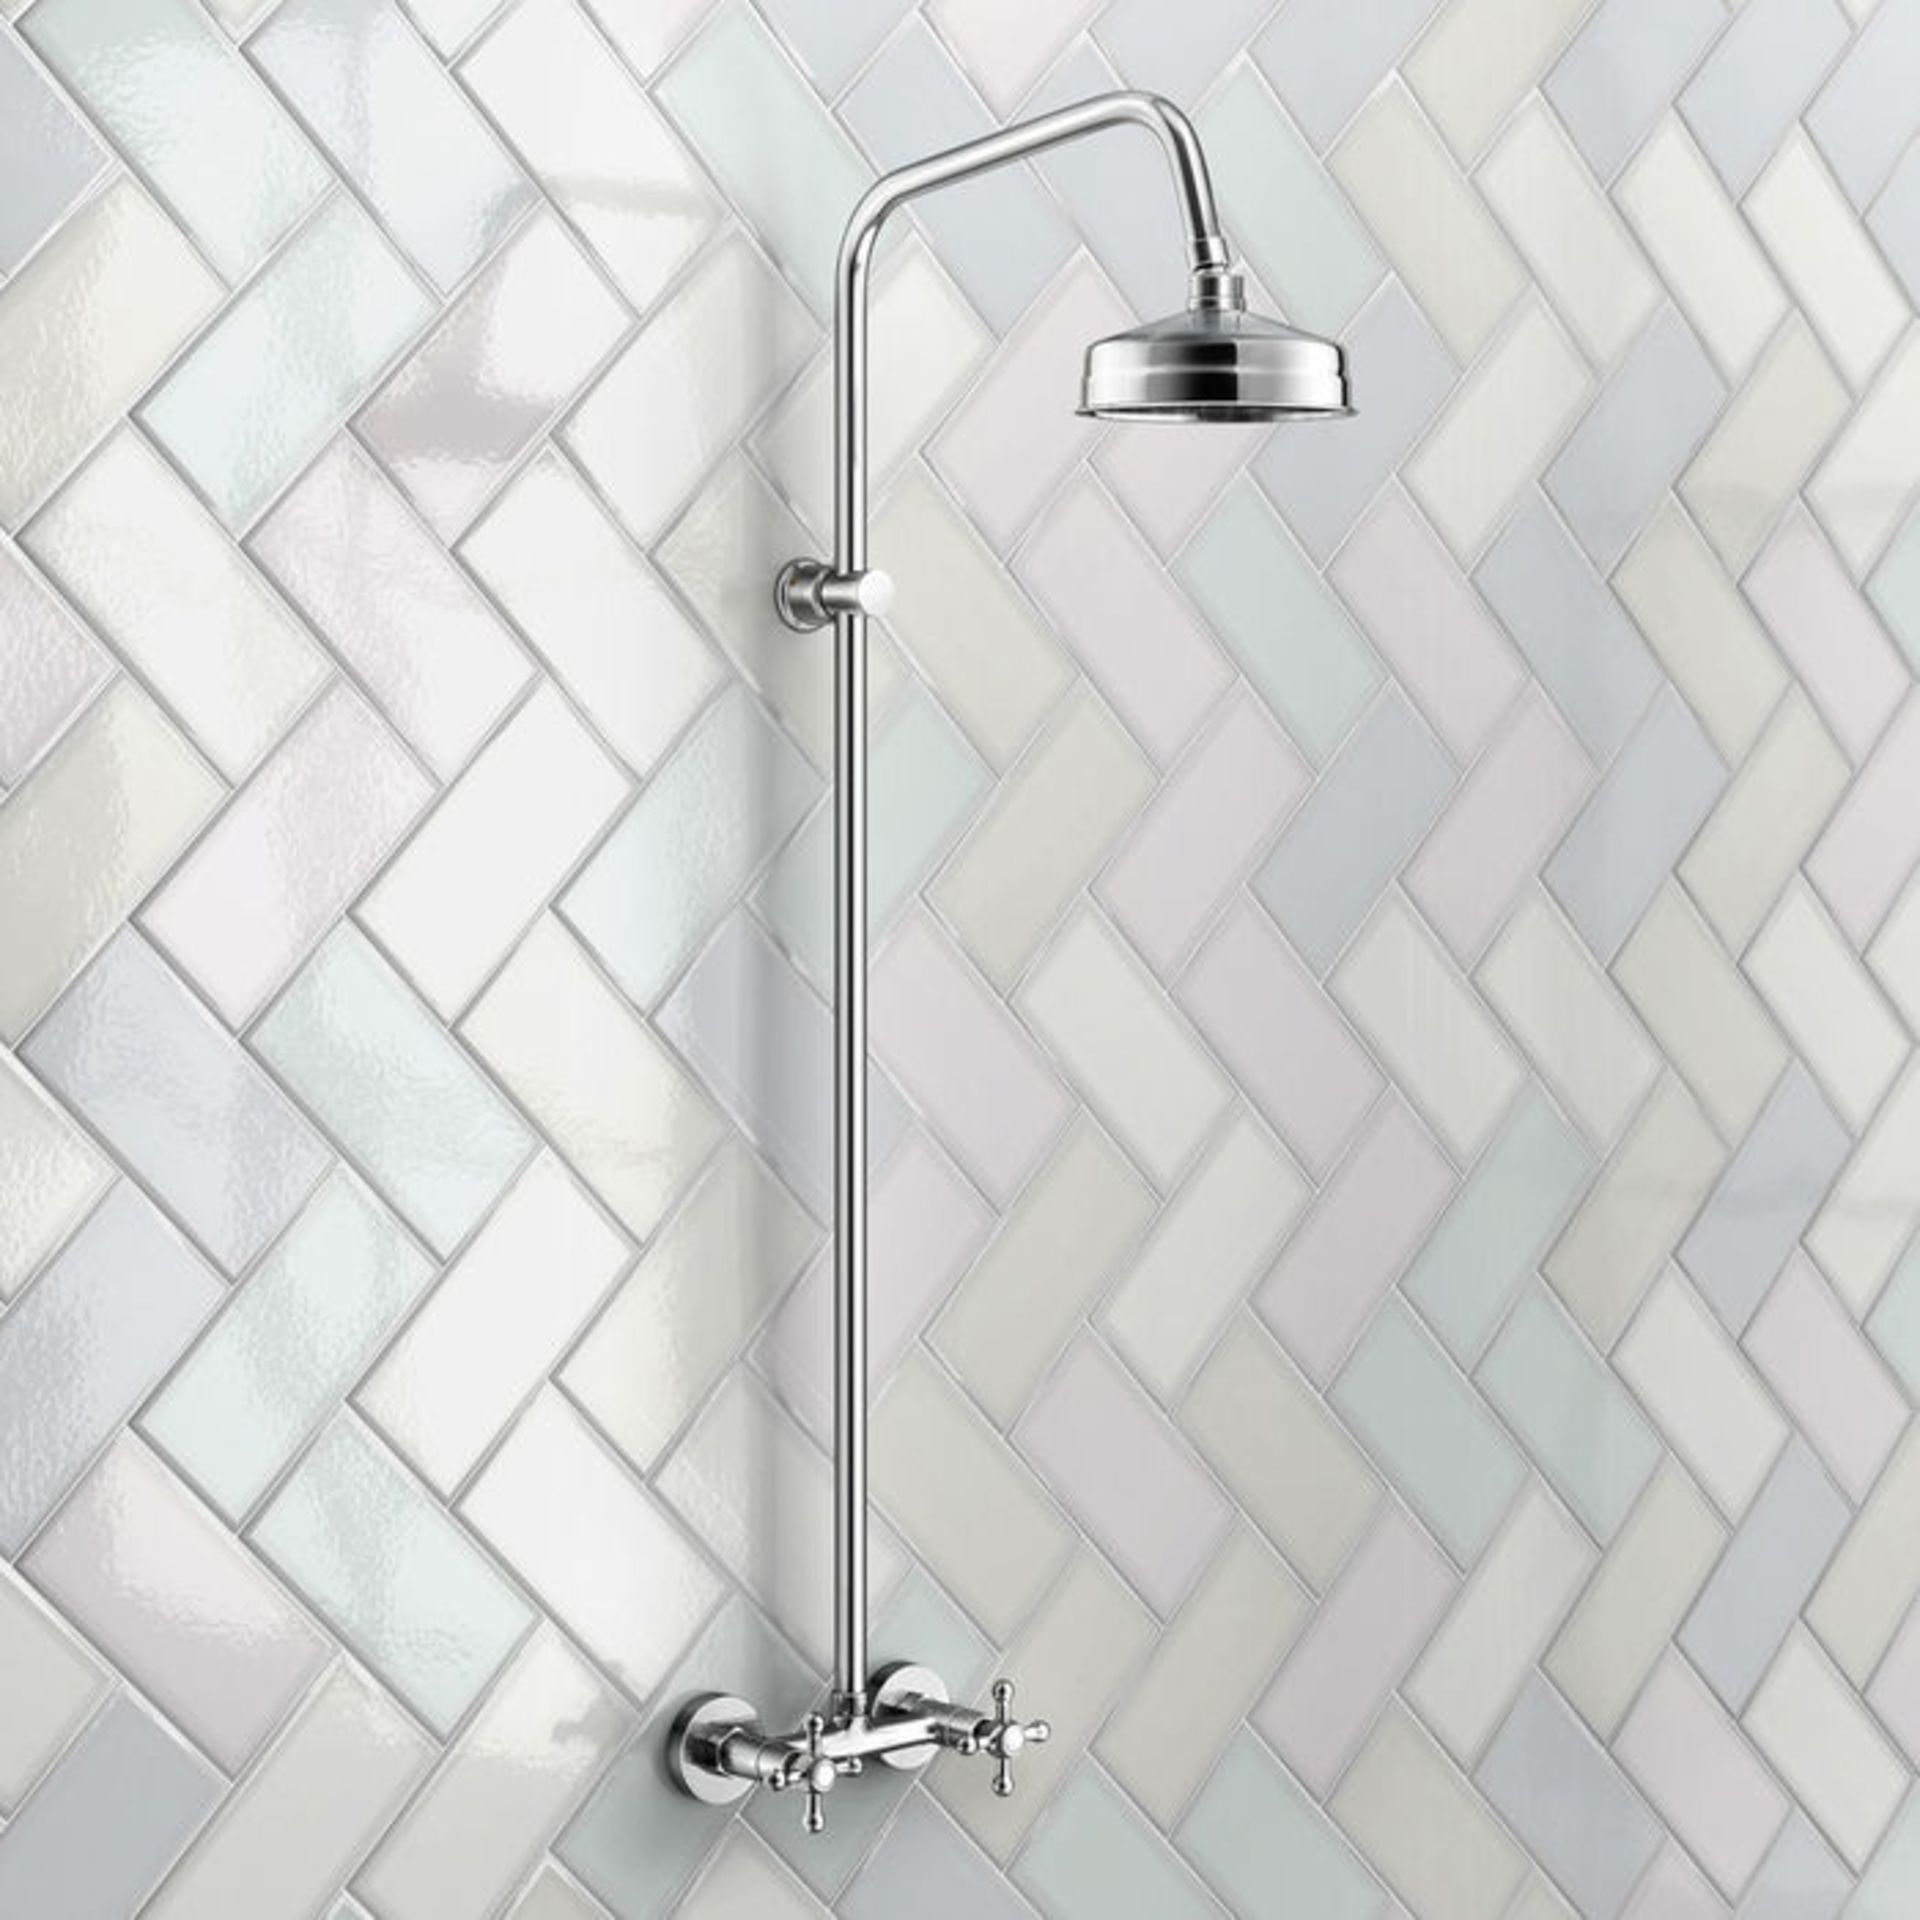 (MW179) Traditional Exposed Shower & Medium Head. Exposed design makes for a statement piece - Image 3 of 3